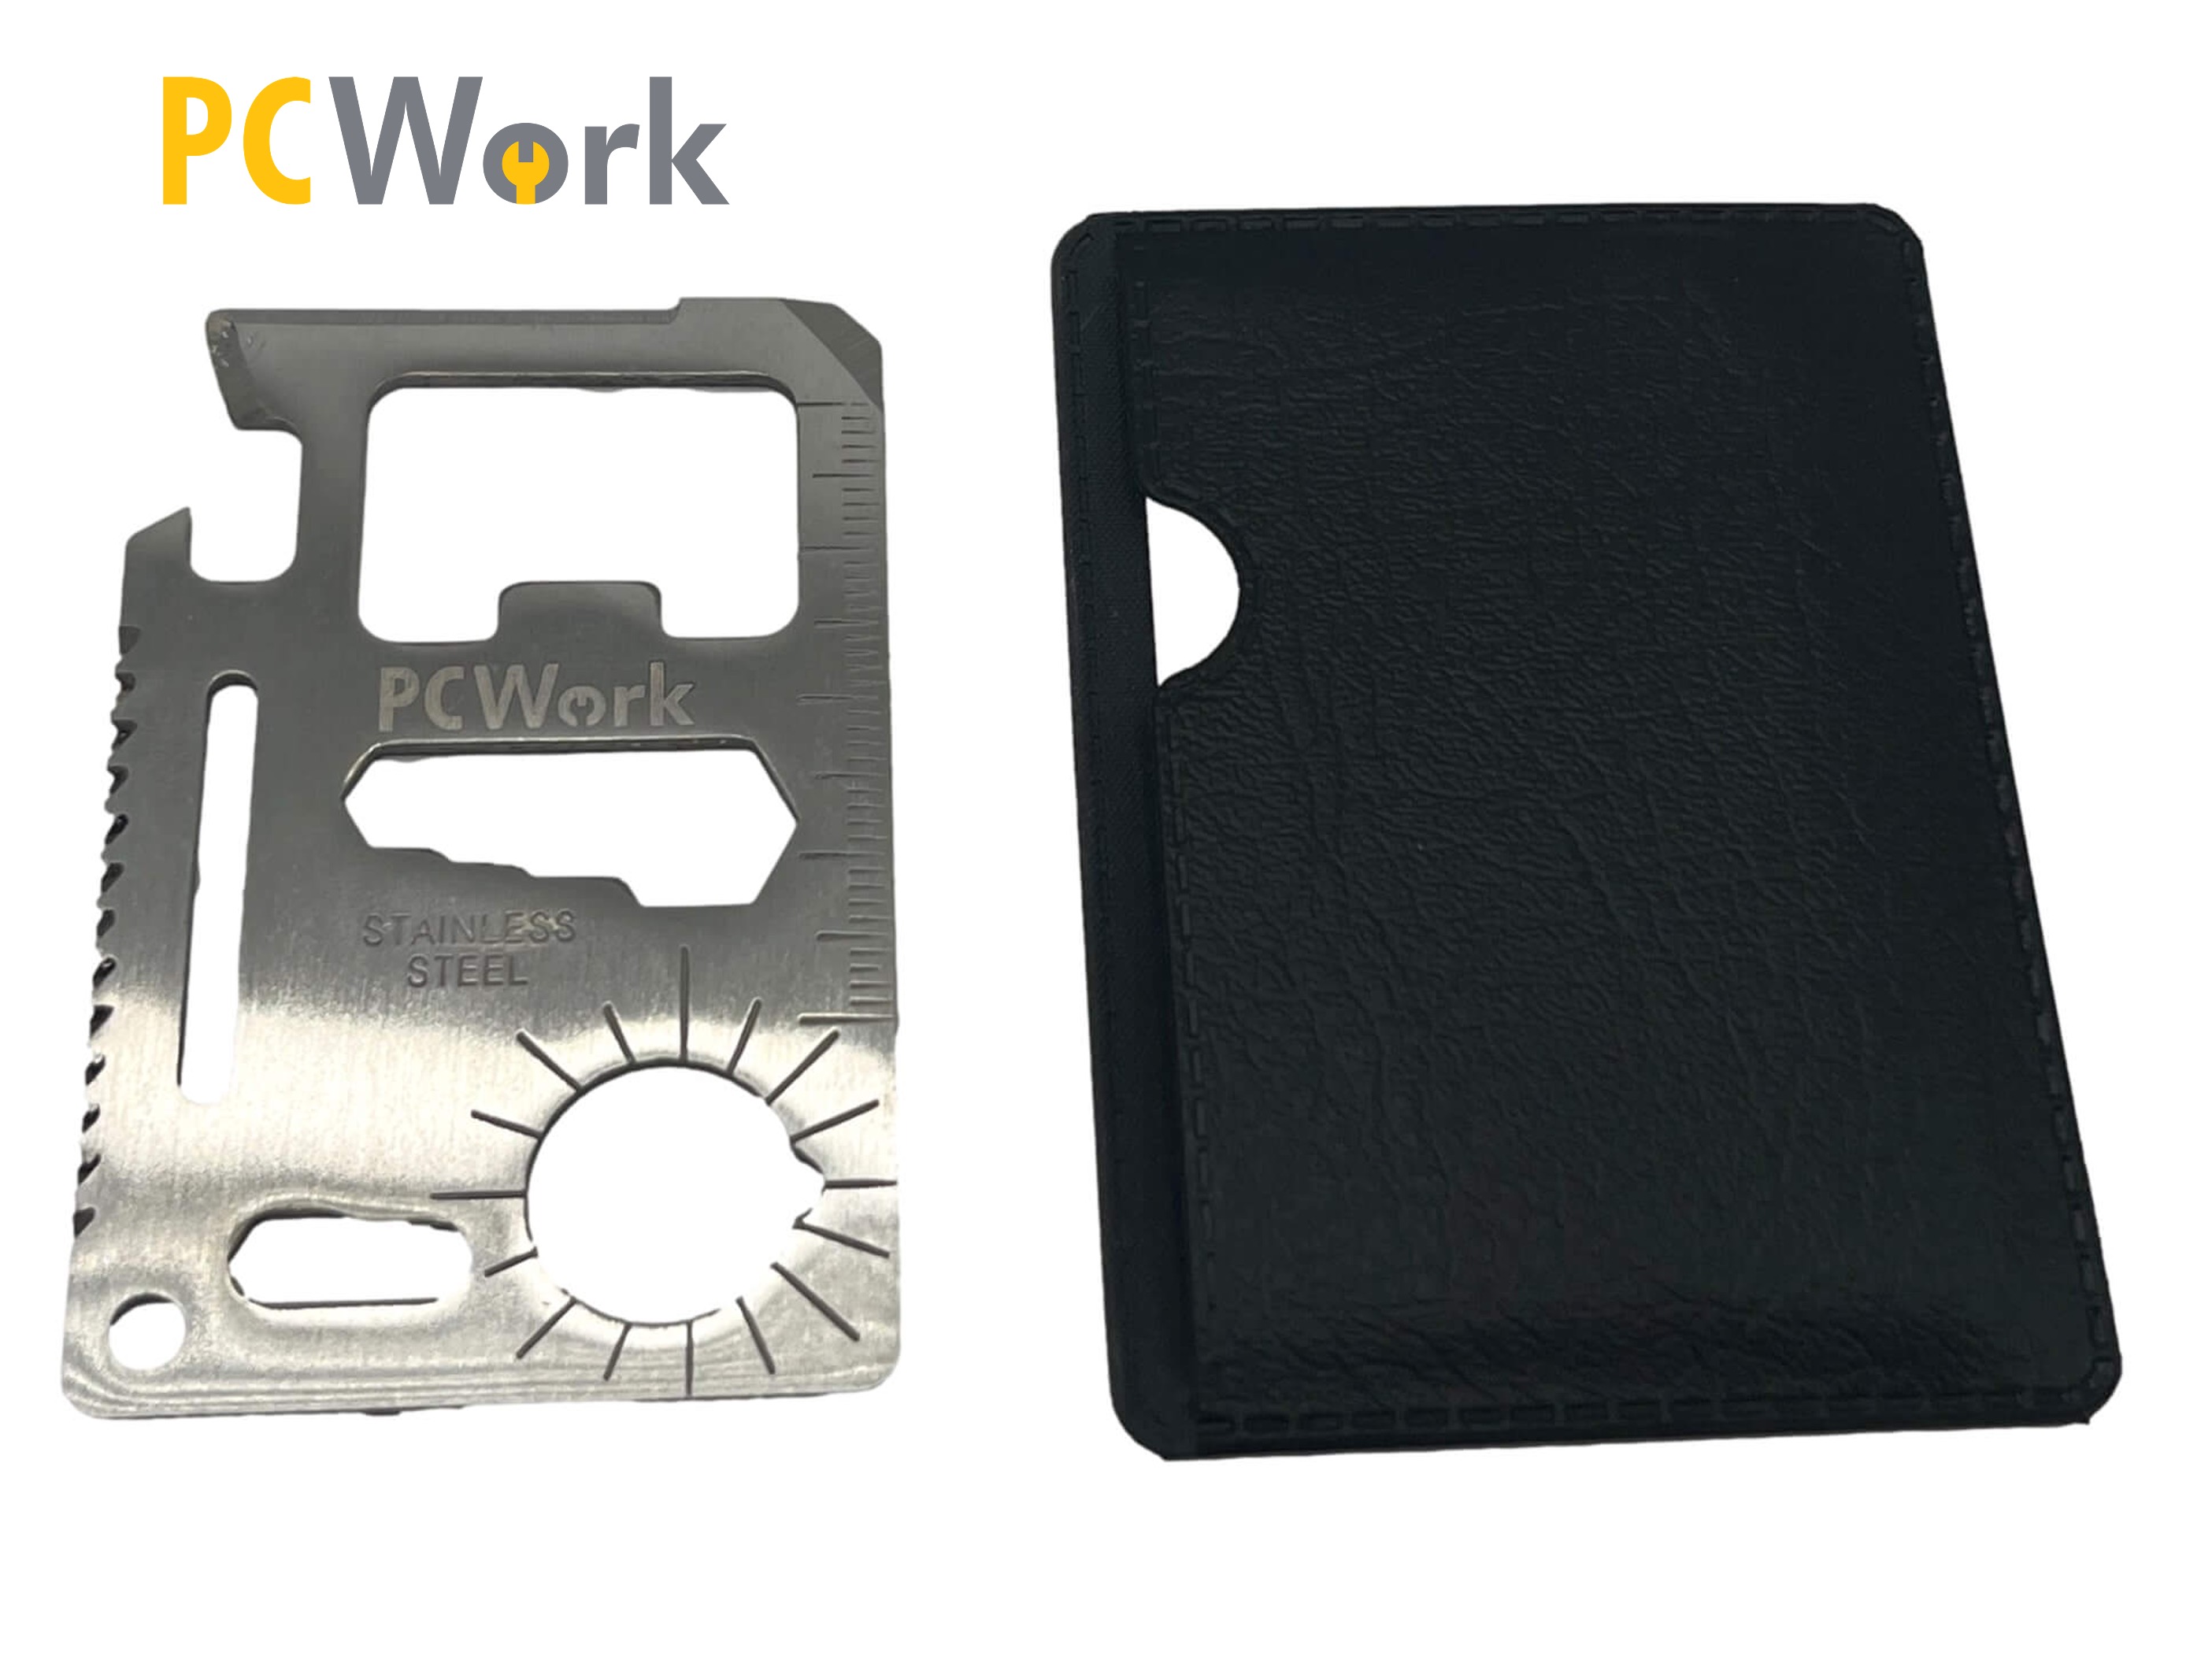 PCW08D Multitool 11 in 1, credit card design, stainless steel